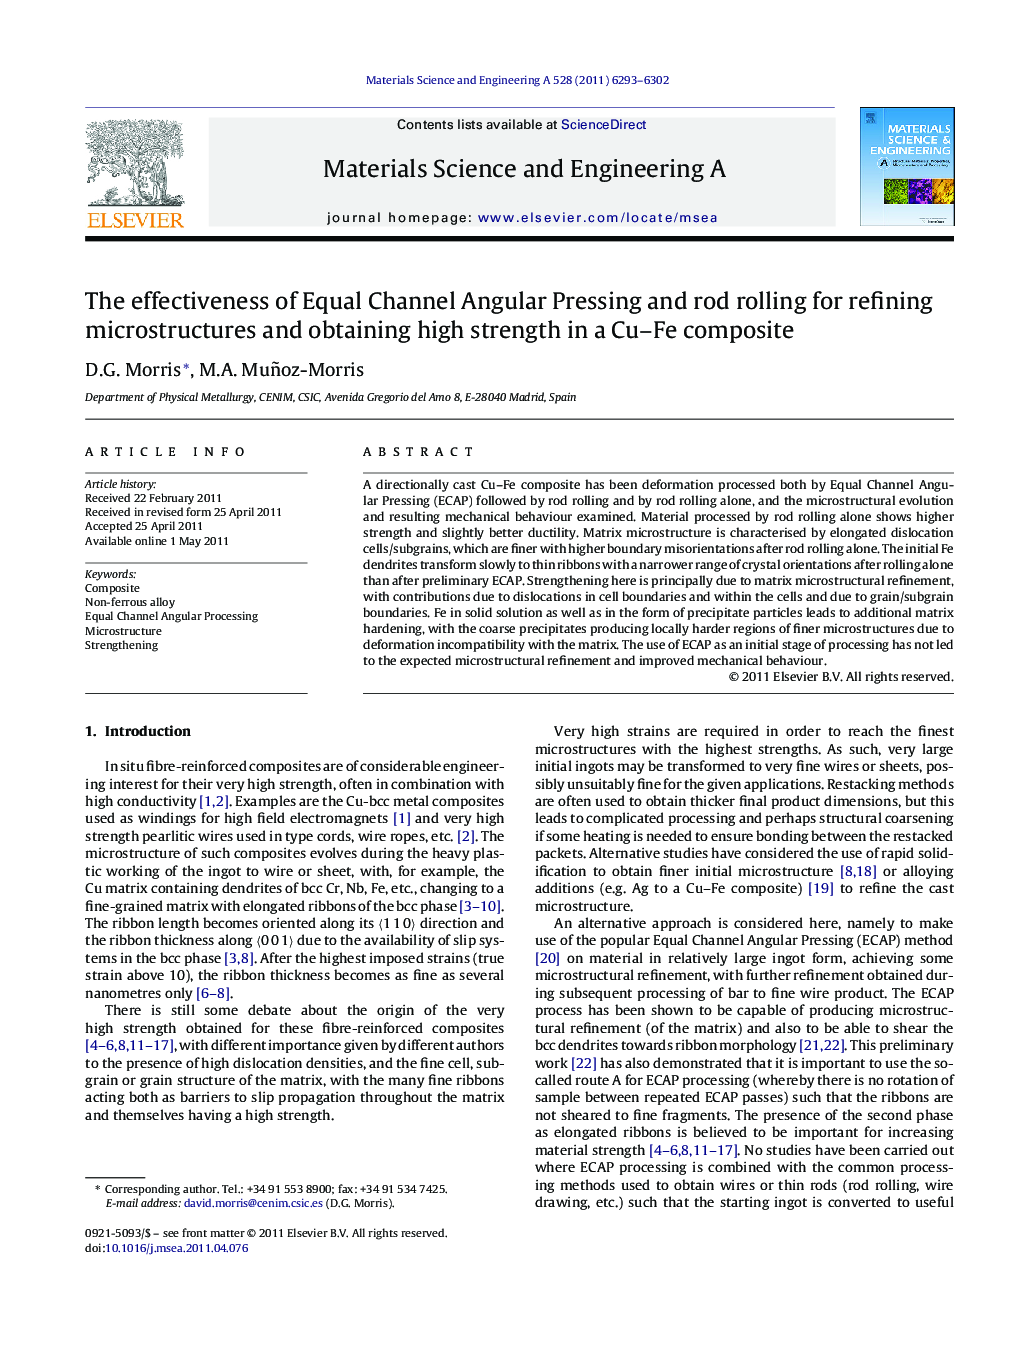 The effectiveness of Equal Channel Angular Pressing and rod rolling for refining microstructures and obtaining high strength in a Cu–Fe composite